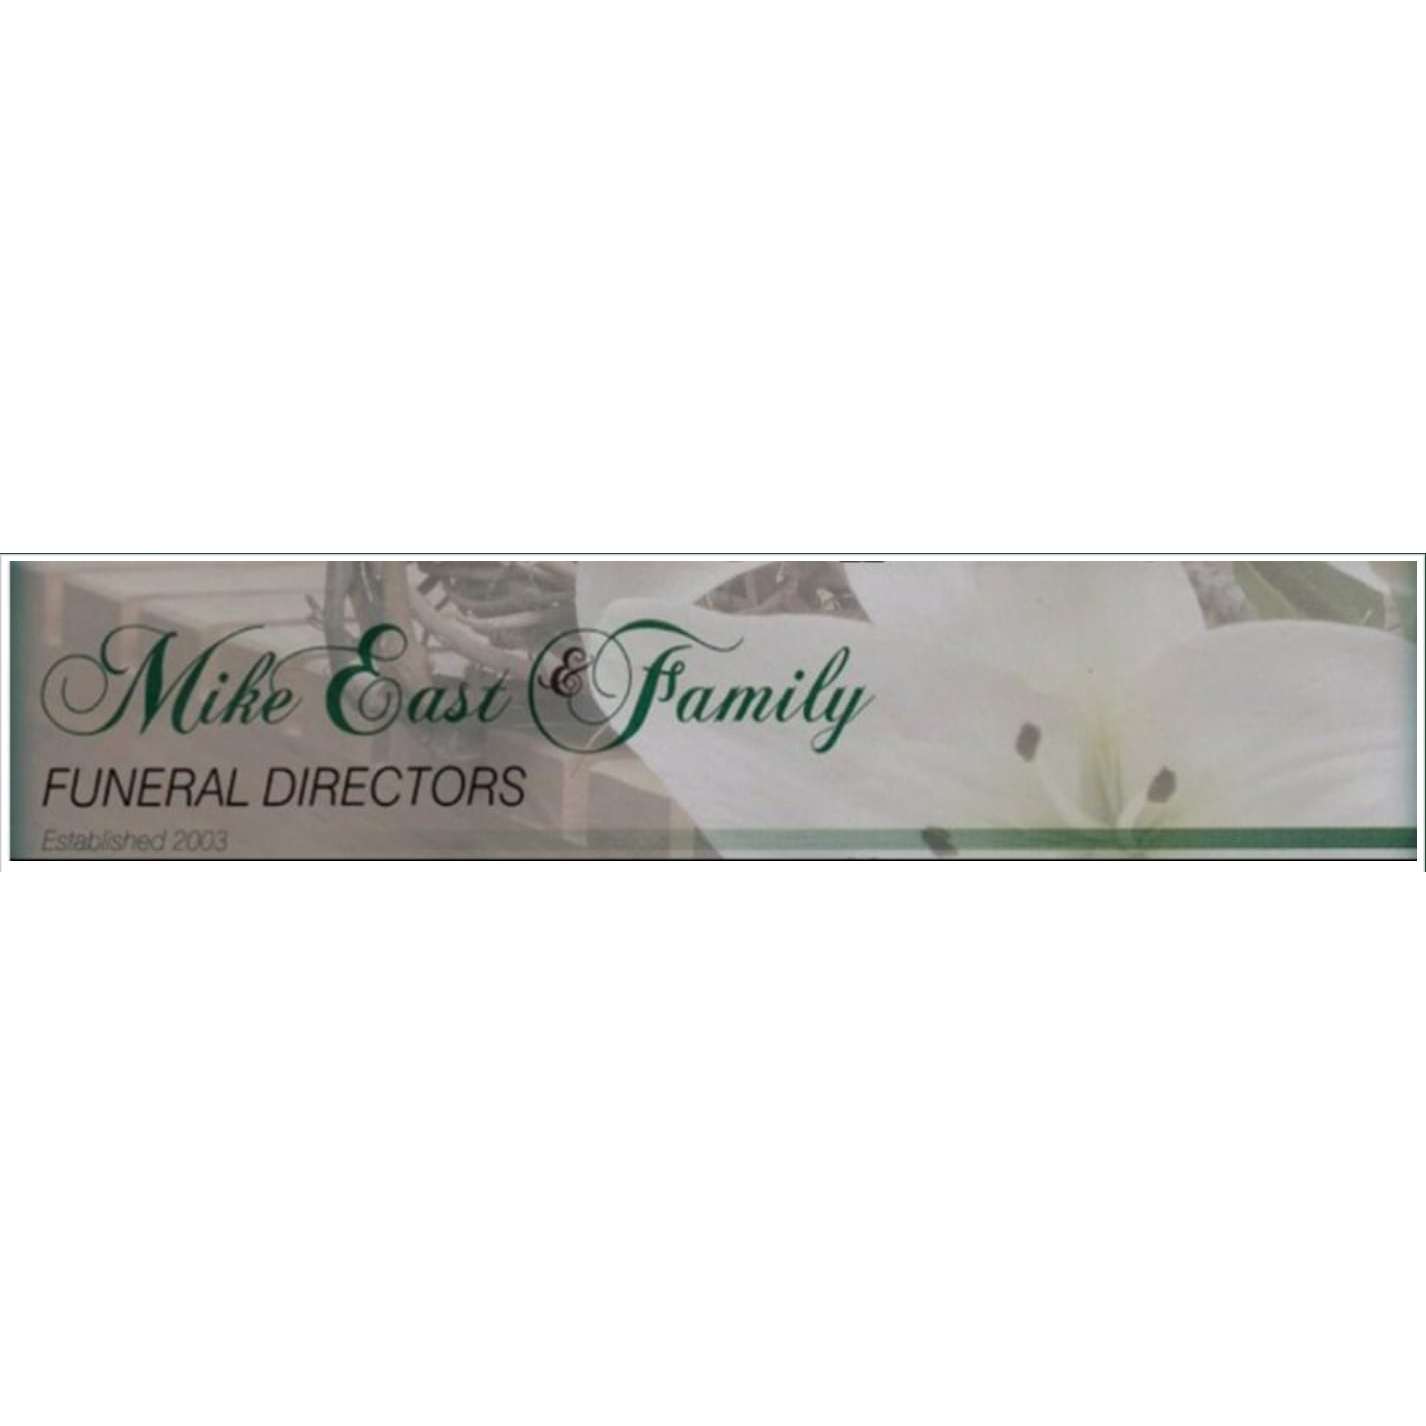 Mike East & Family Funeral Directors - Hull, North Yorkshire HU9 3AT - 01482 375214 | ShowMeLocal.com